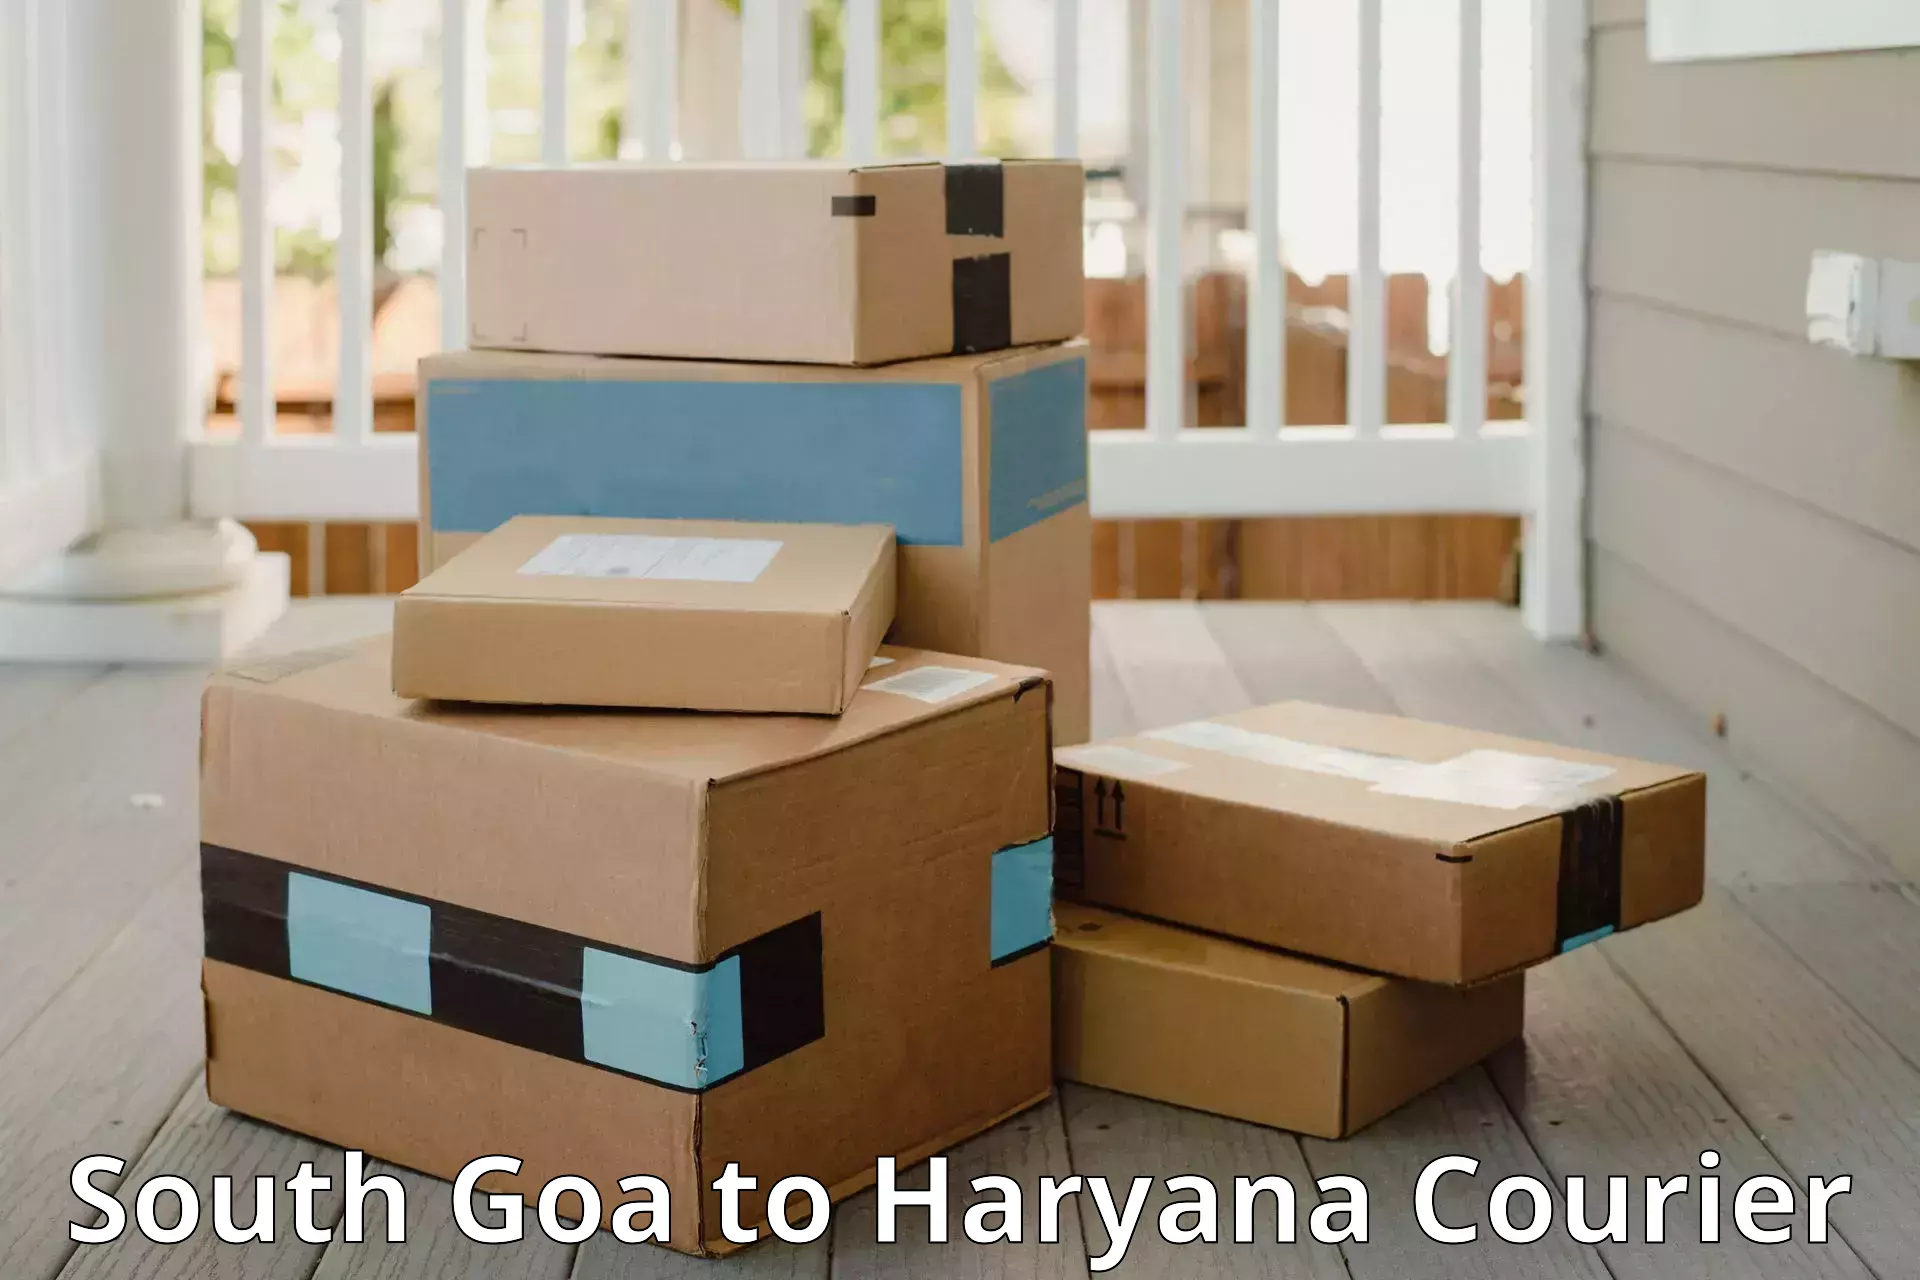 Baggage transport technology in South Goa to Gurgaon